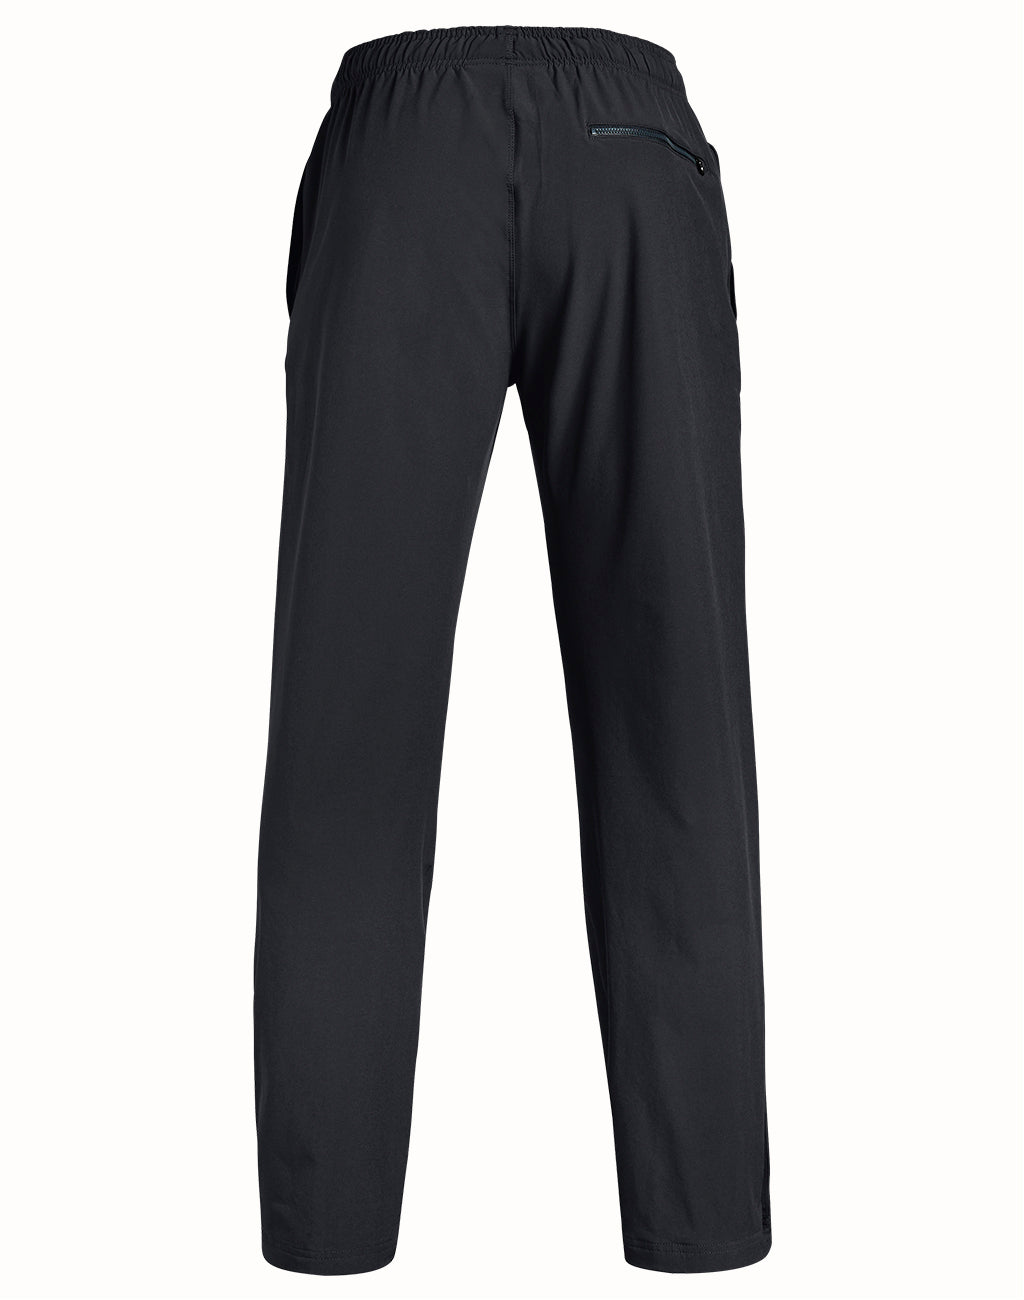 Men's Under Armour Hockey Warm Up Pant 